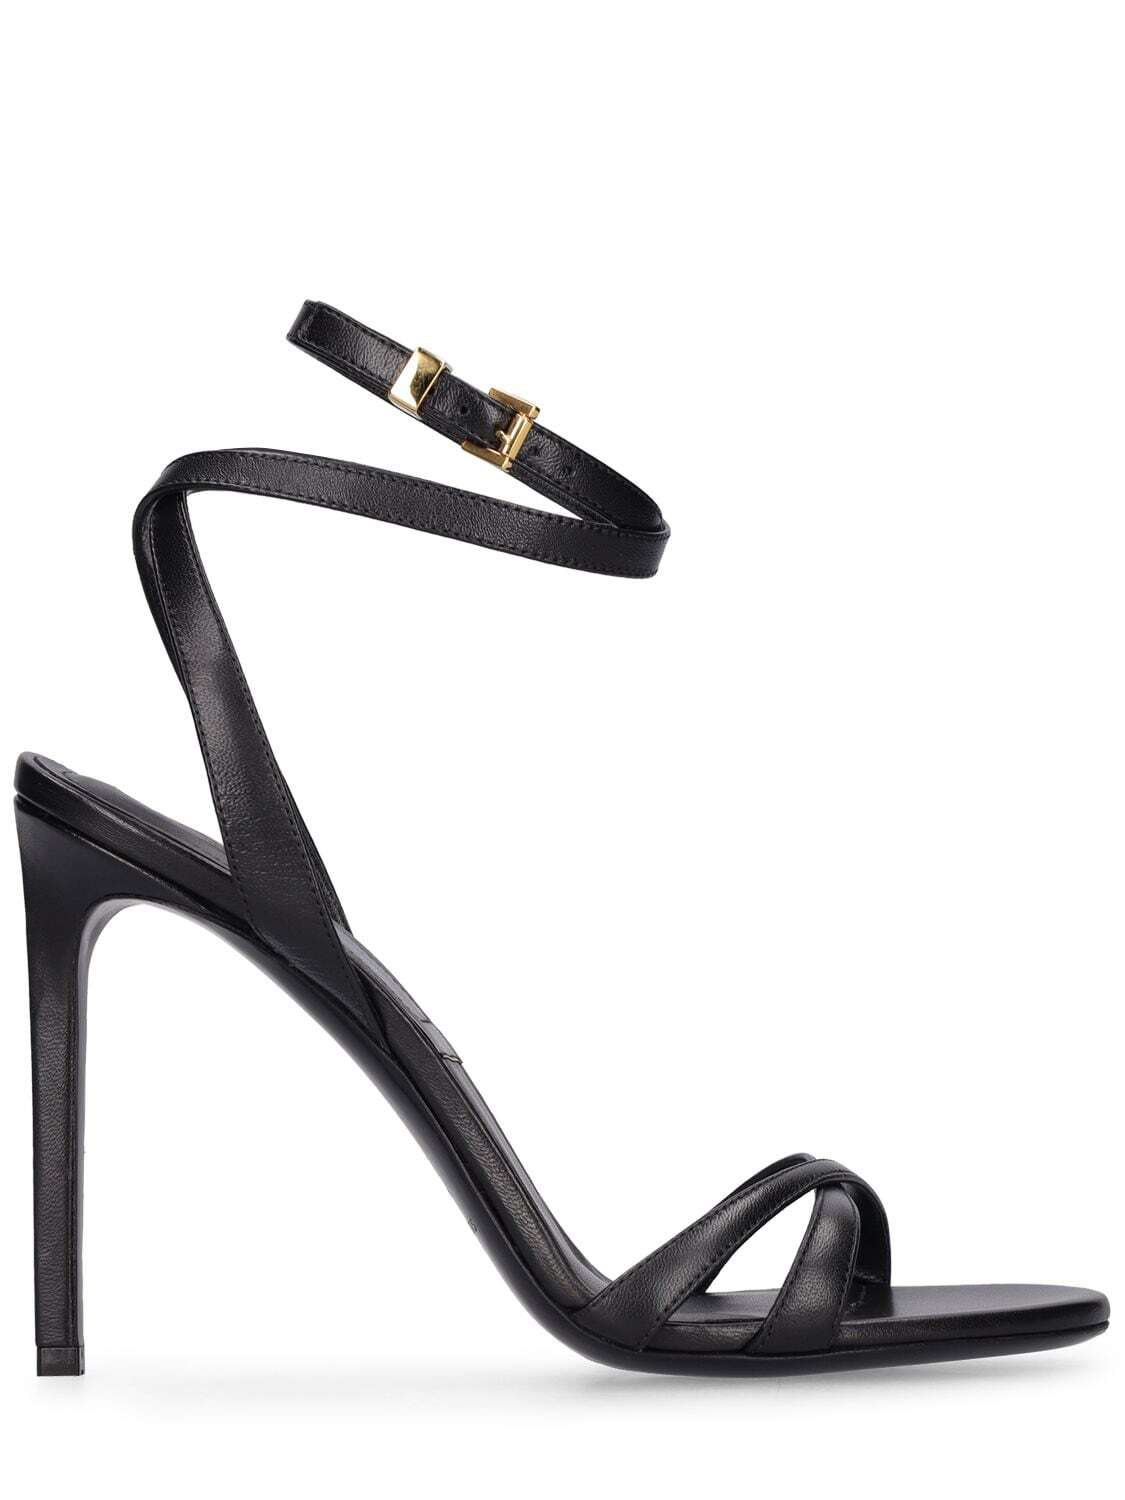 MICHAEL KORS COLLECTION 105mm Chrissy Leather Sandals in black